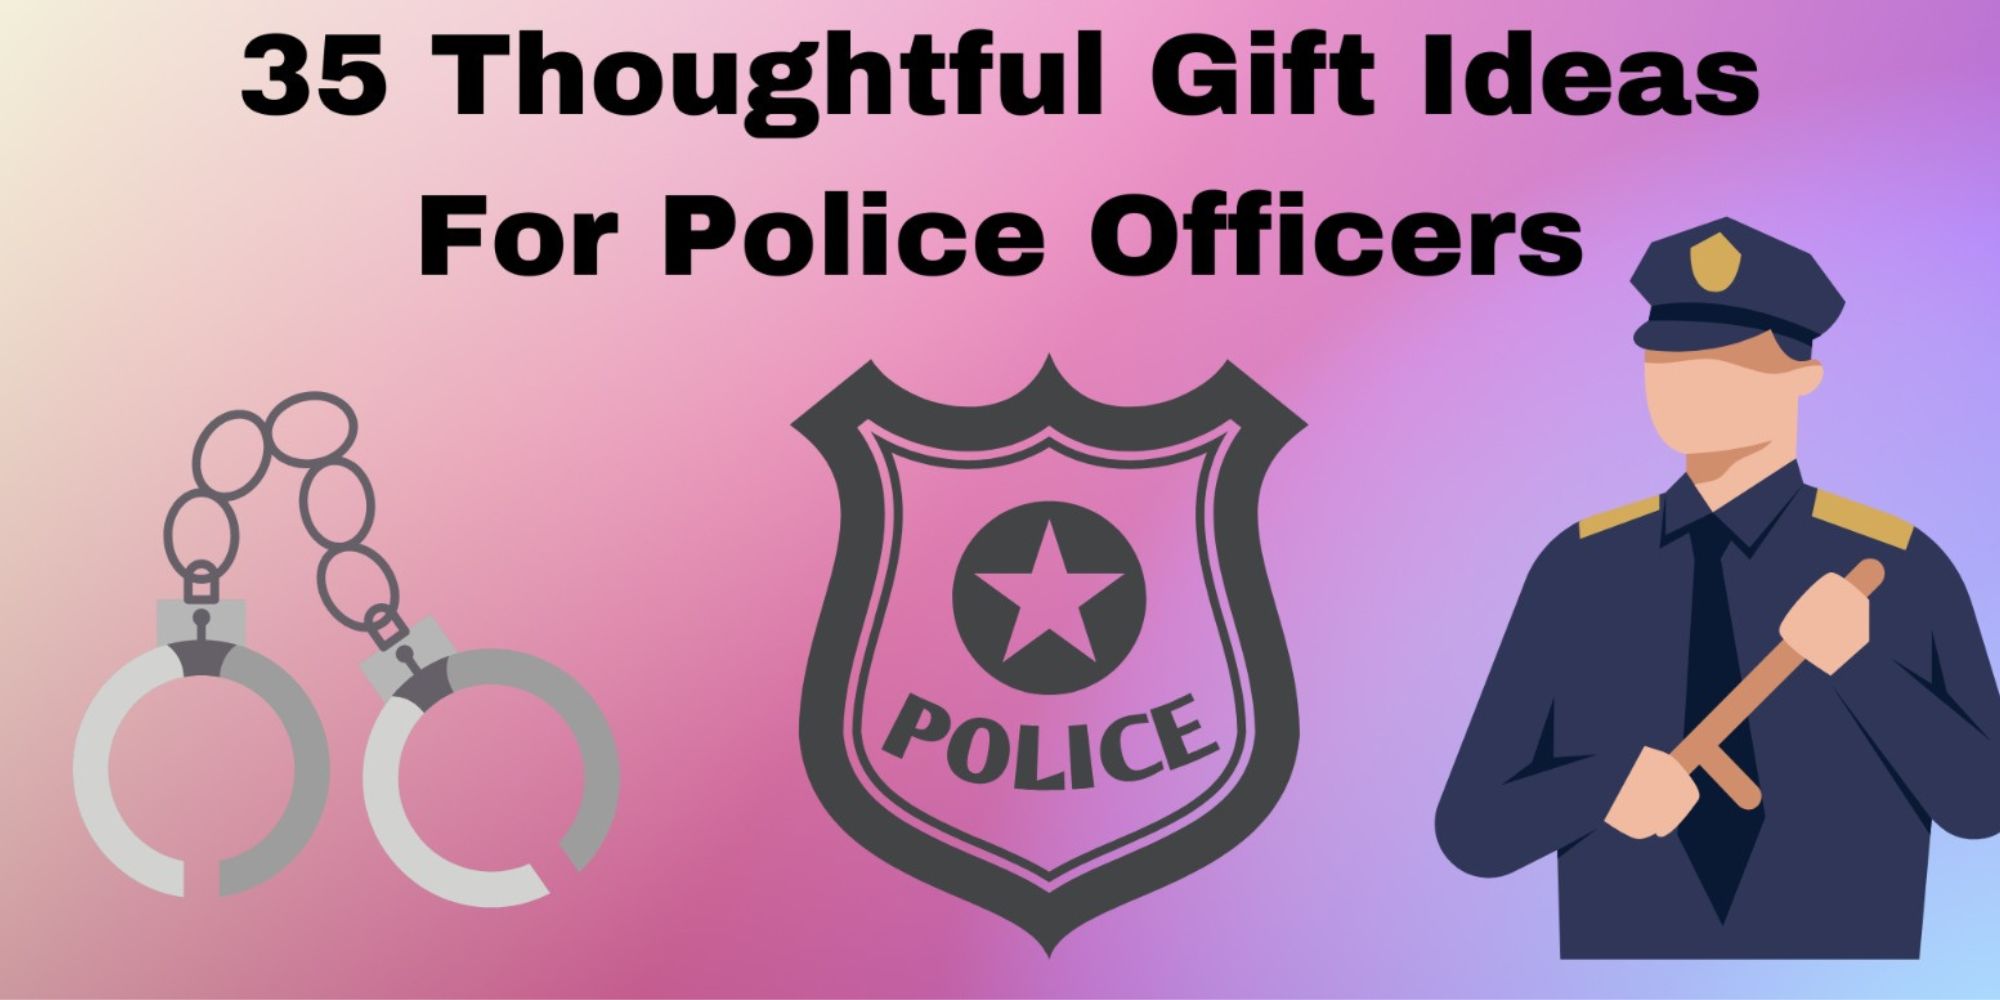 35 Thoughtful Gift Ideas For Police Officers